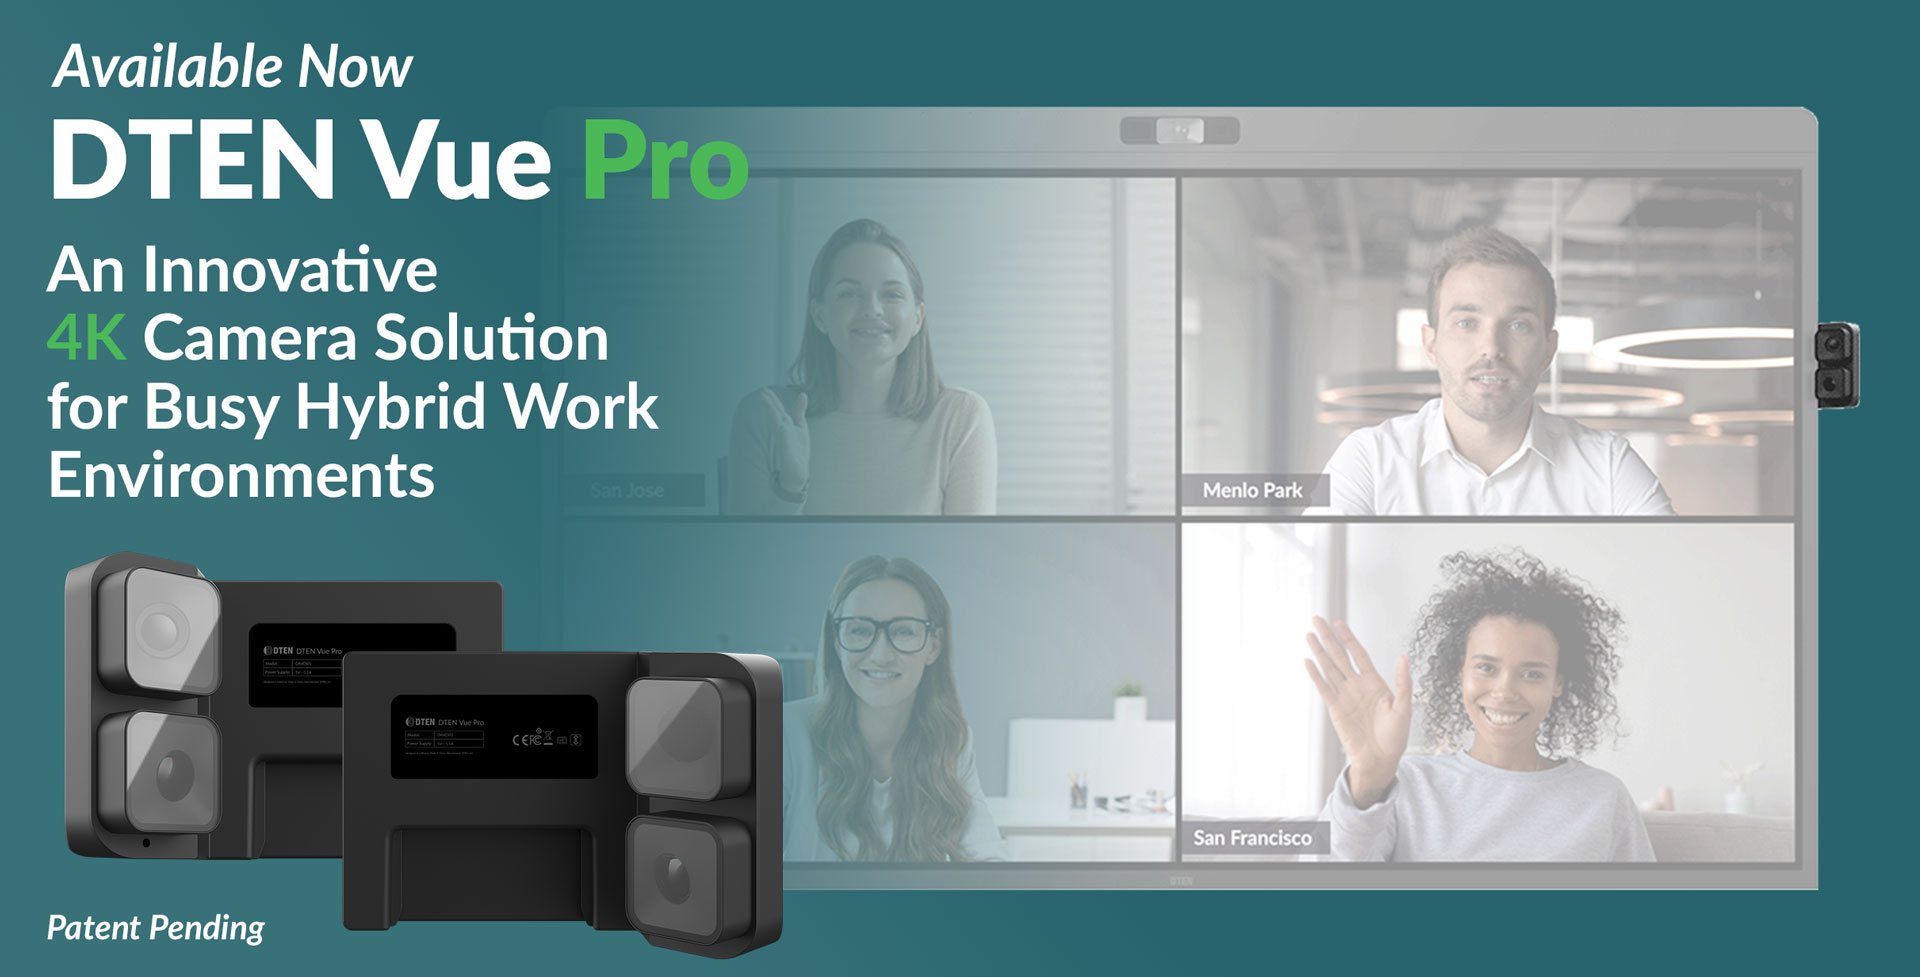 DTEN Vue Pro Camera System: Makes You the Star of the Show